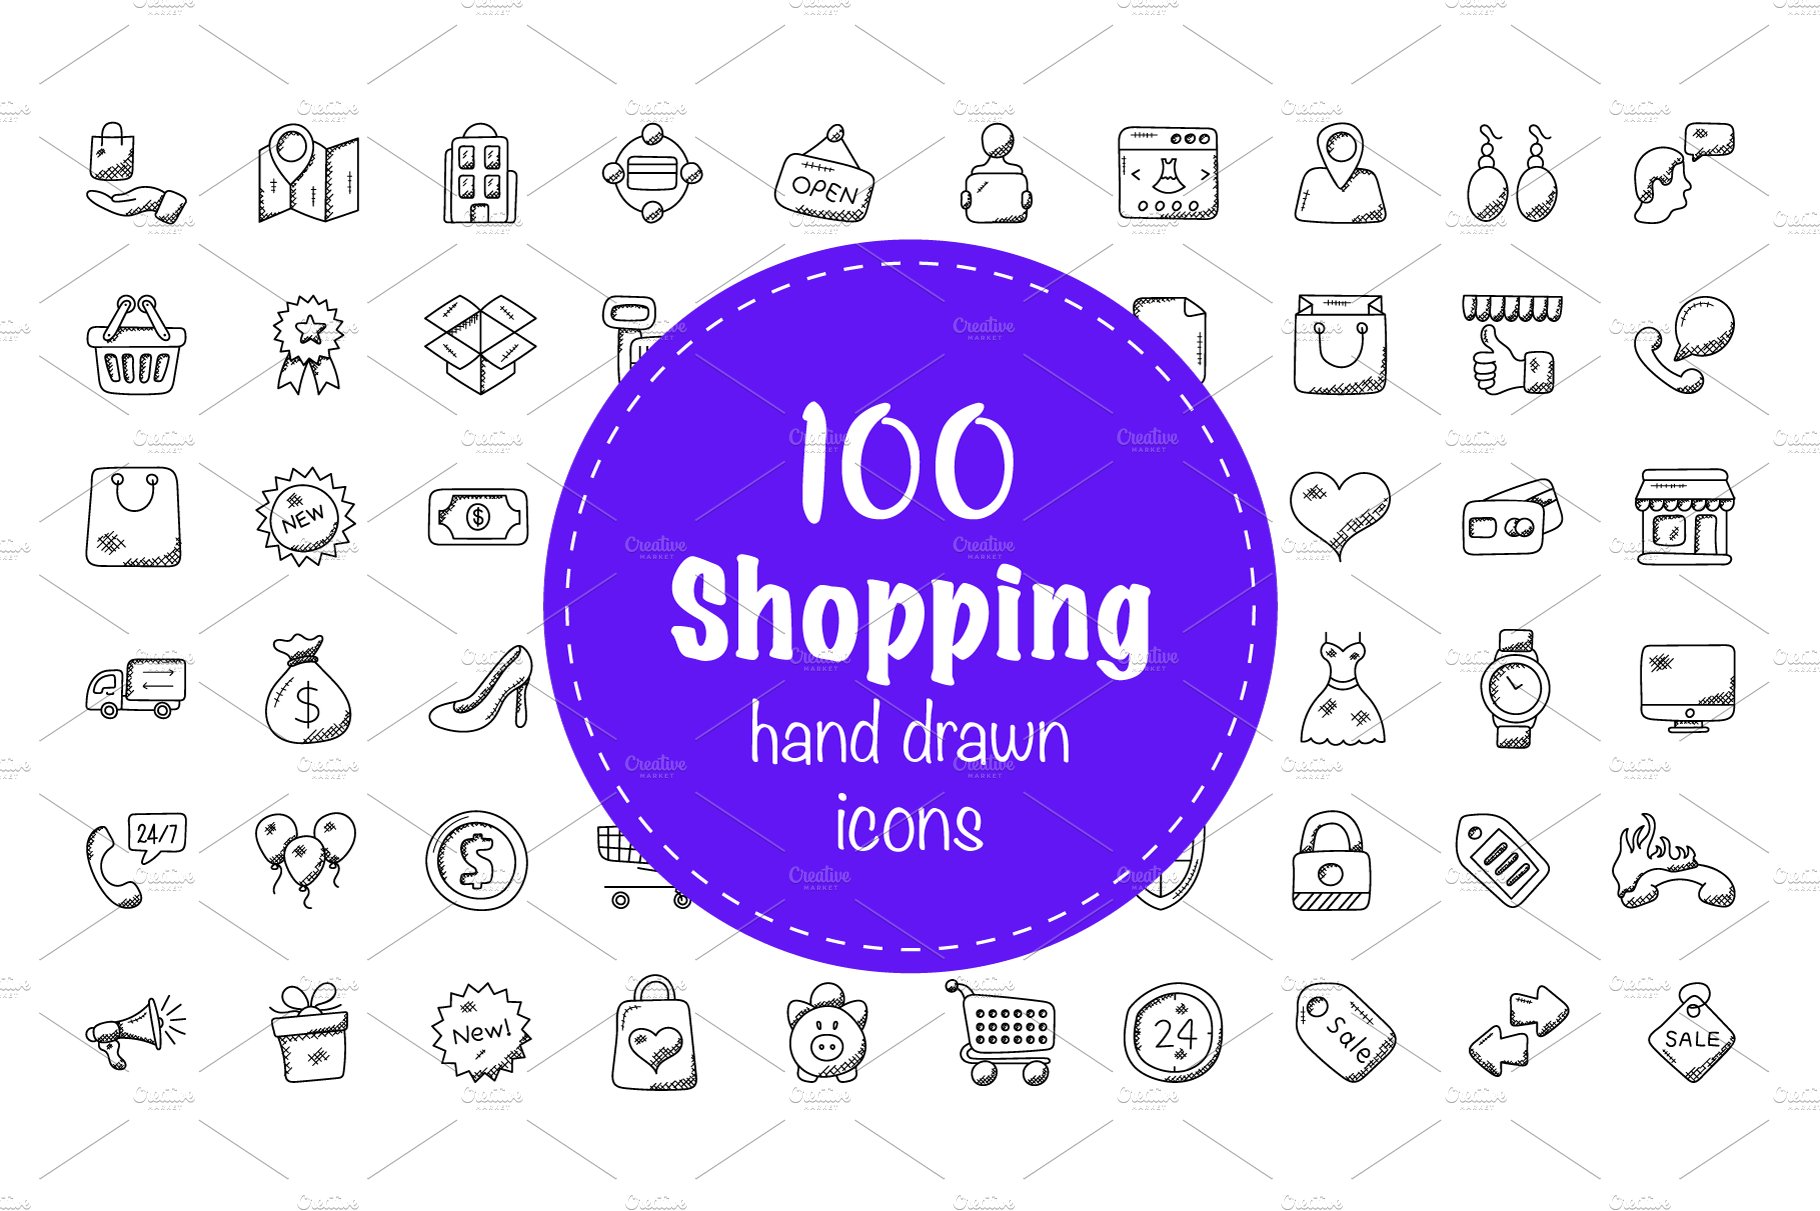 100 Shopping Doodle Icons cover image.